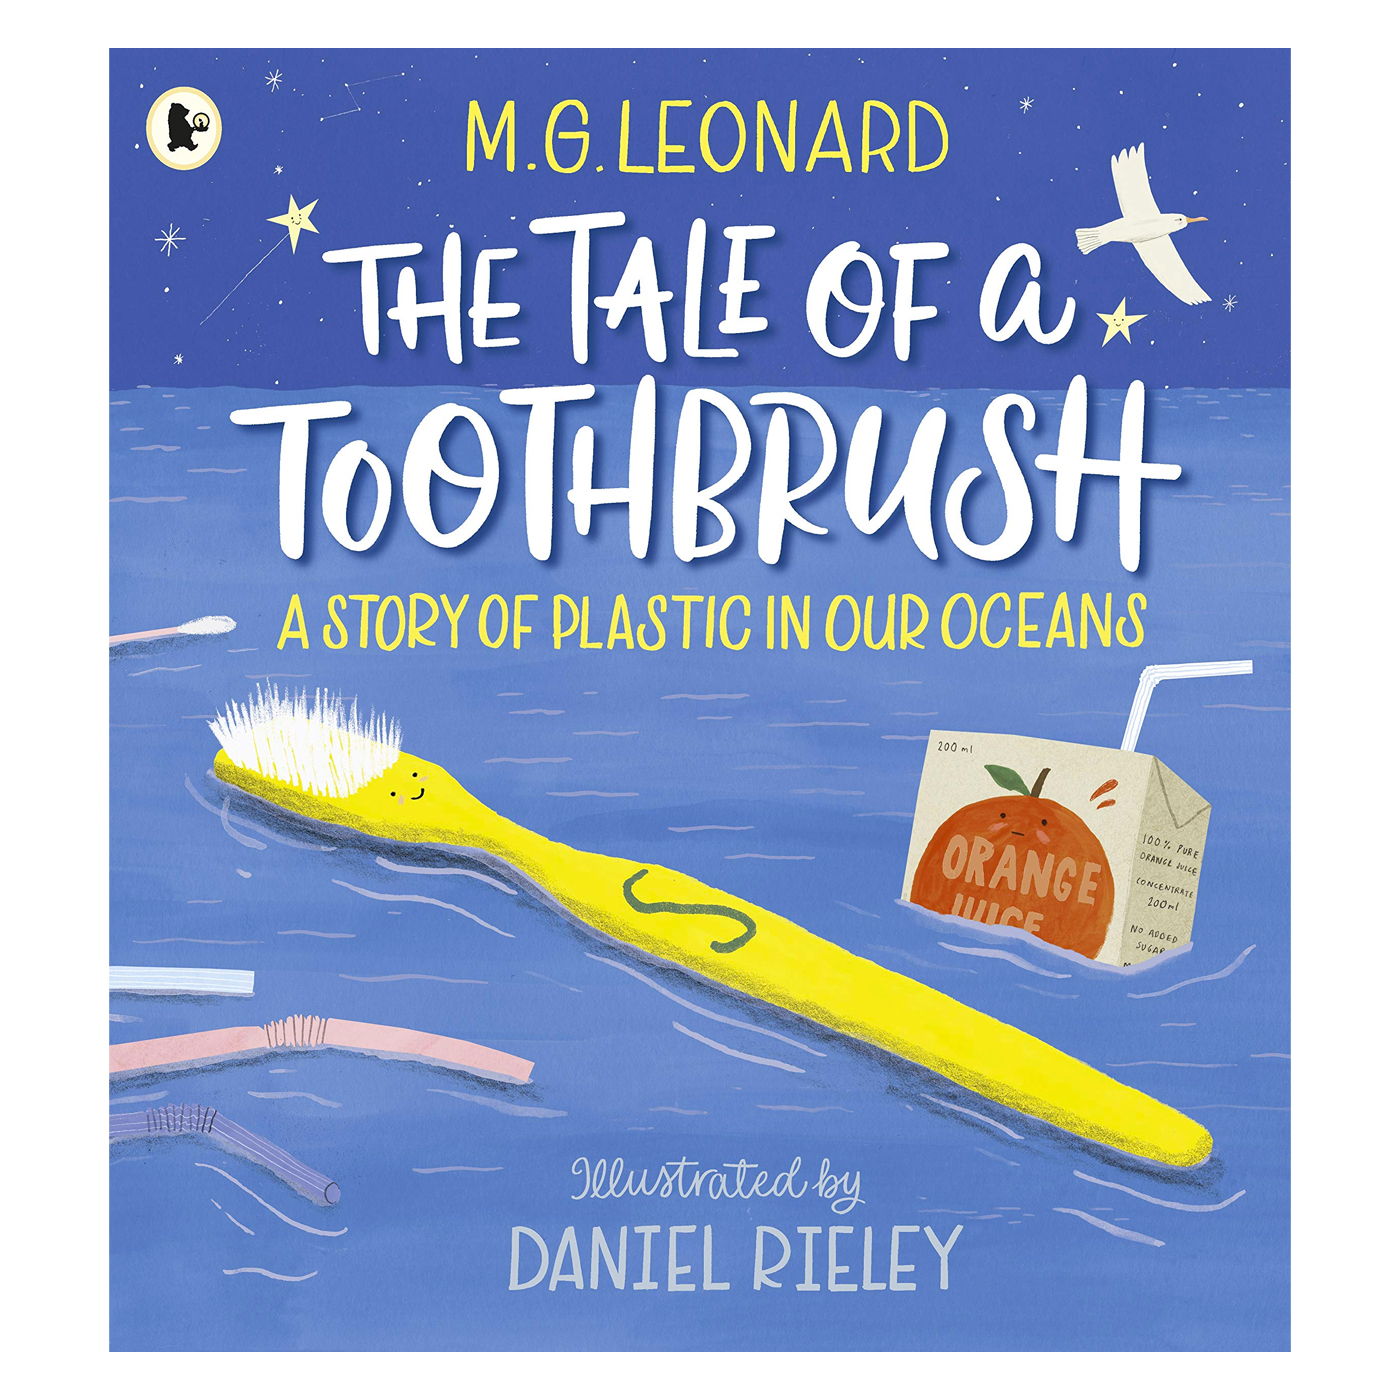  The Tale Of A Toothbrush